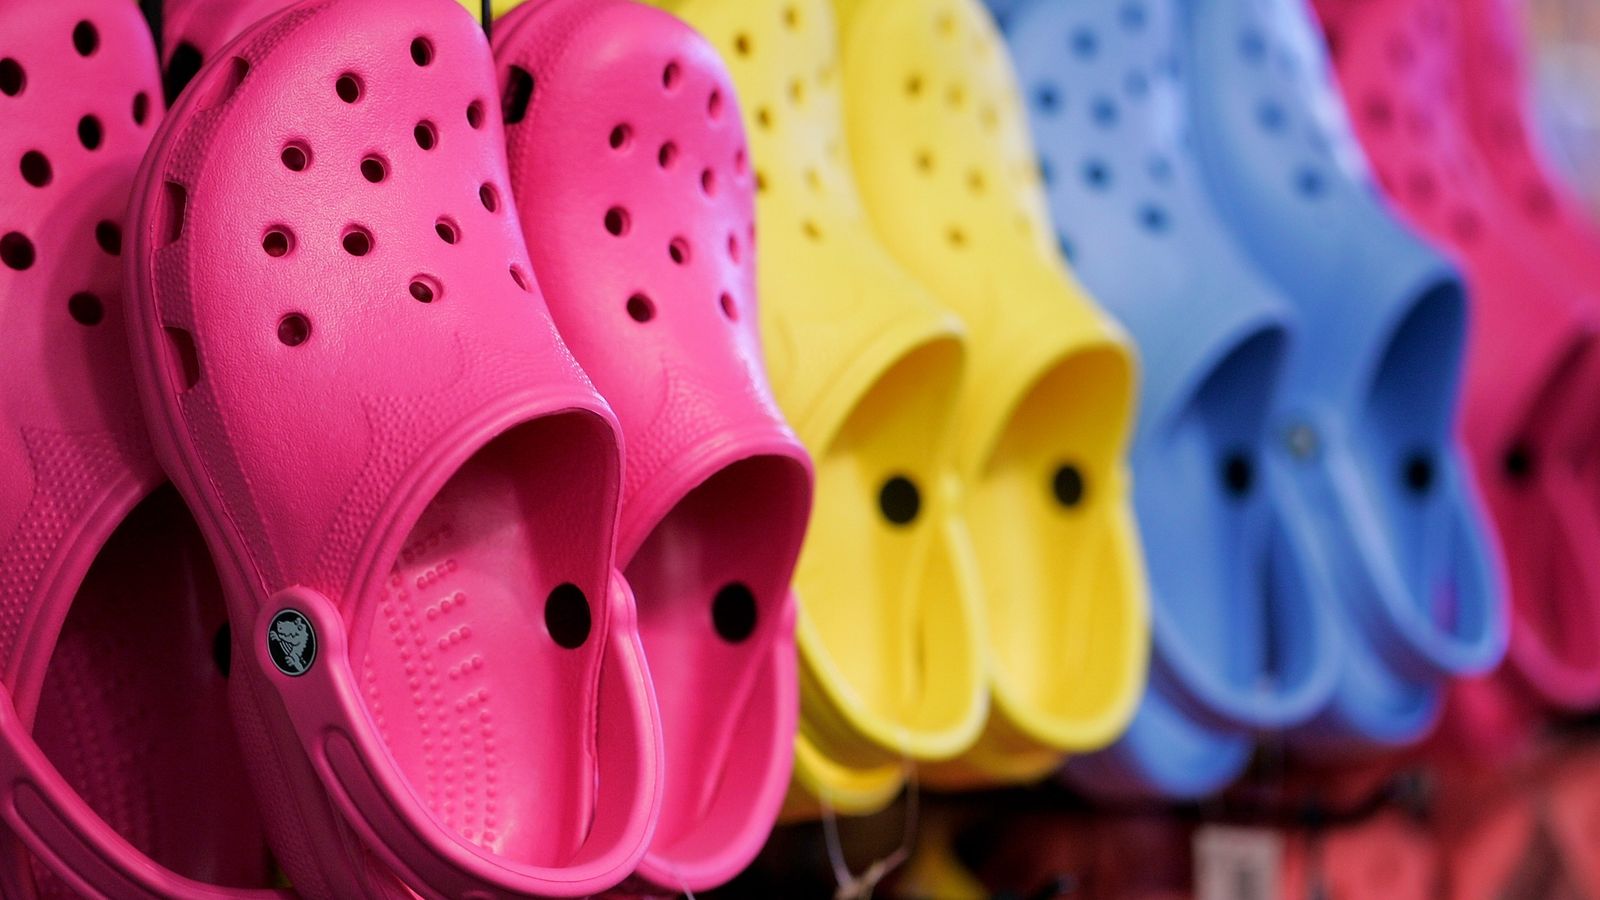 Free Crocs giveaway 2022: Enter Croctober contest for free shoes ...